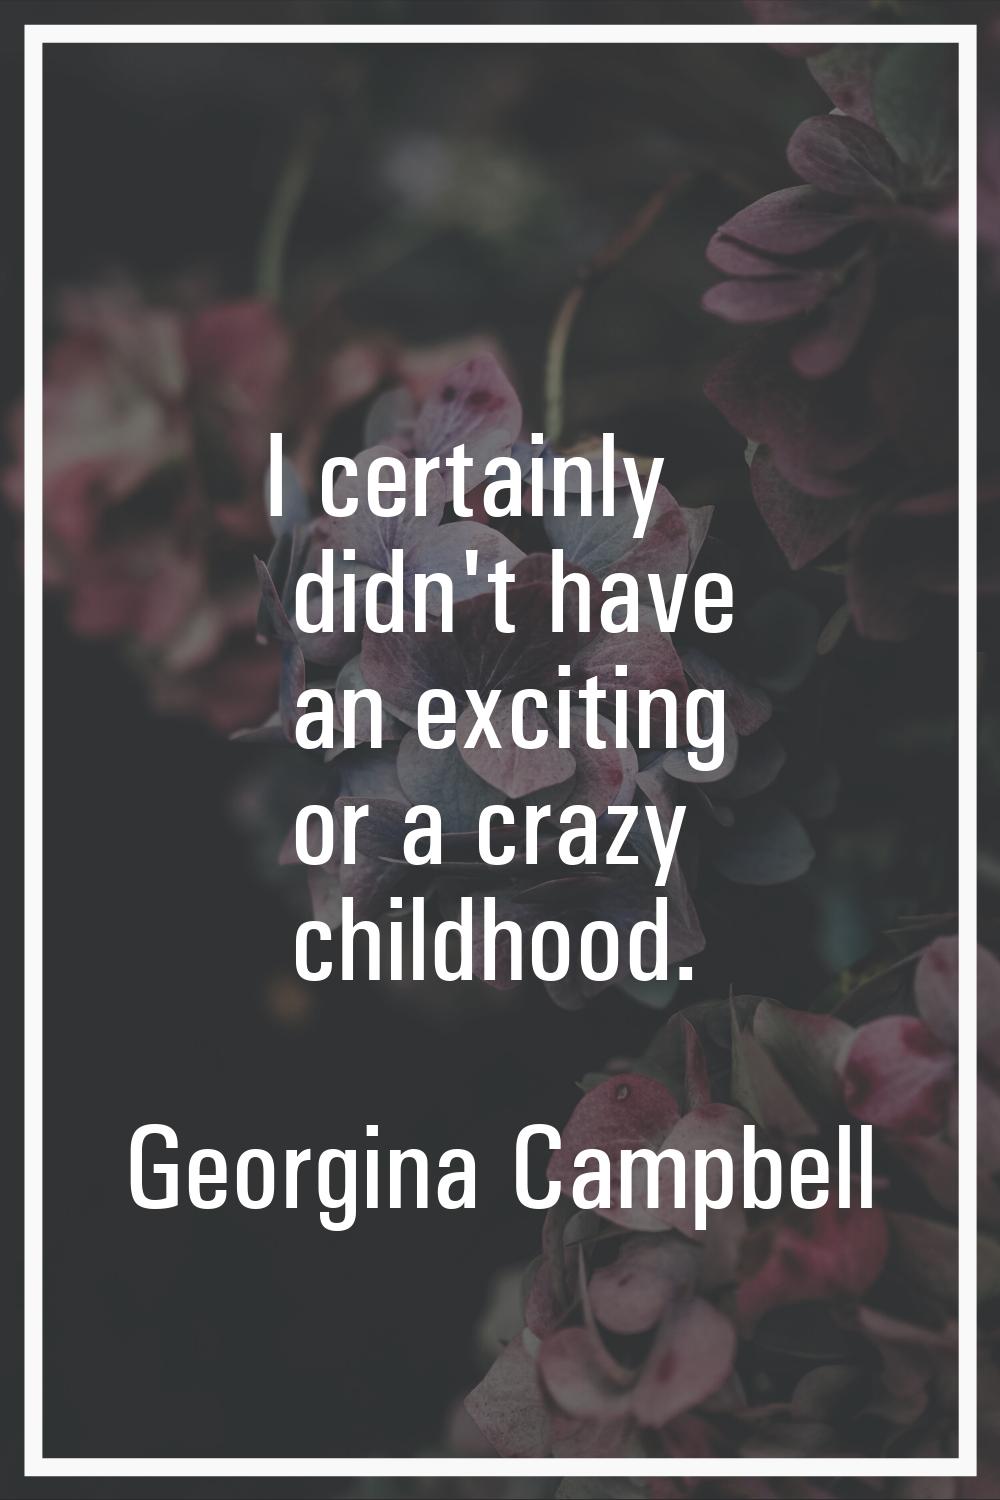 I certainly didn't have an exciting or a crazy childhood.